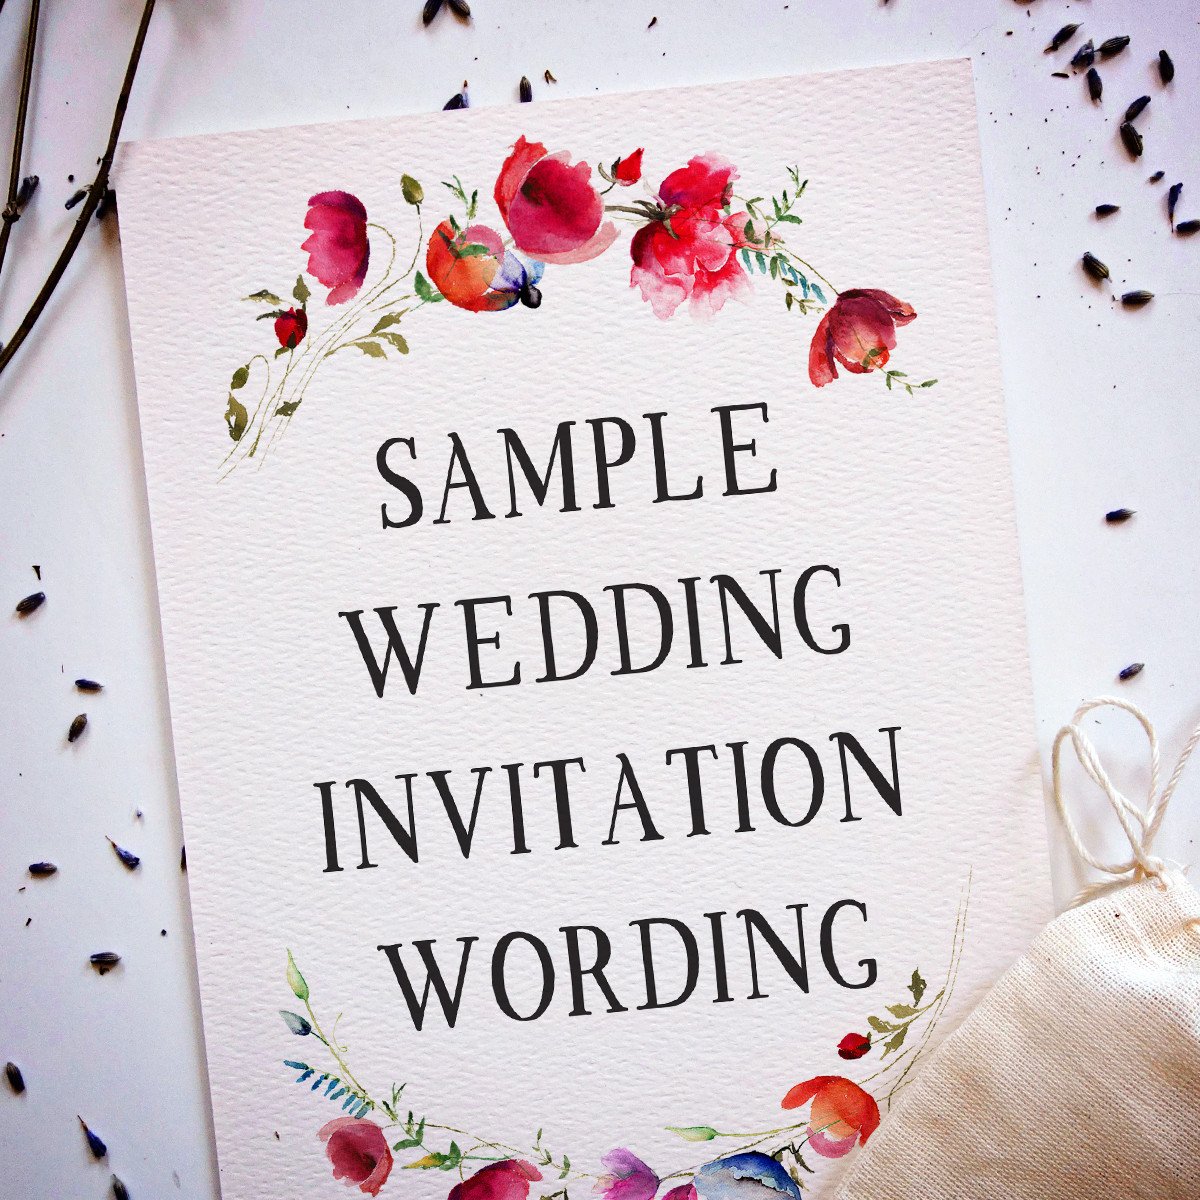 Wedding Invitation Wording Samples from Traditional to